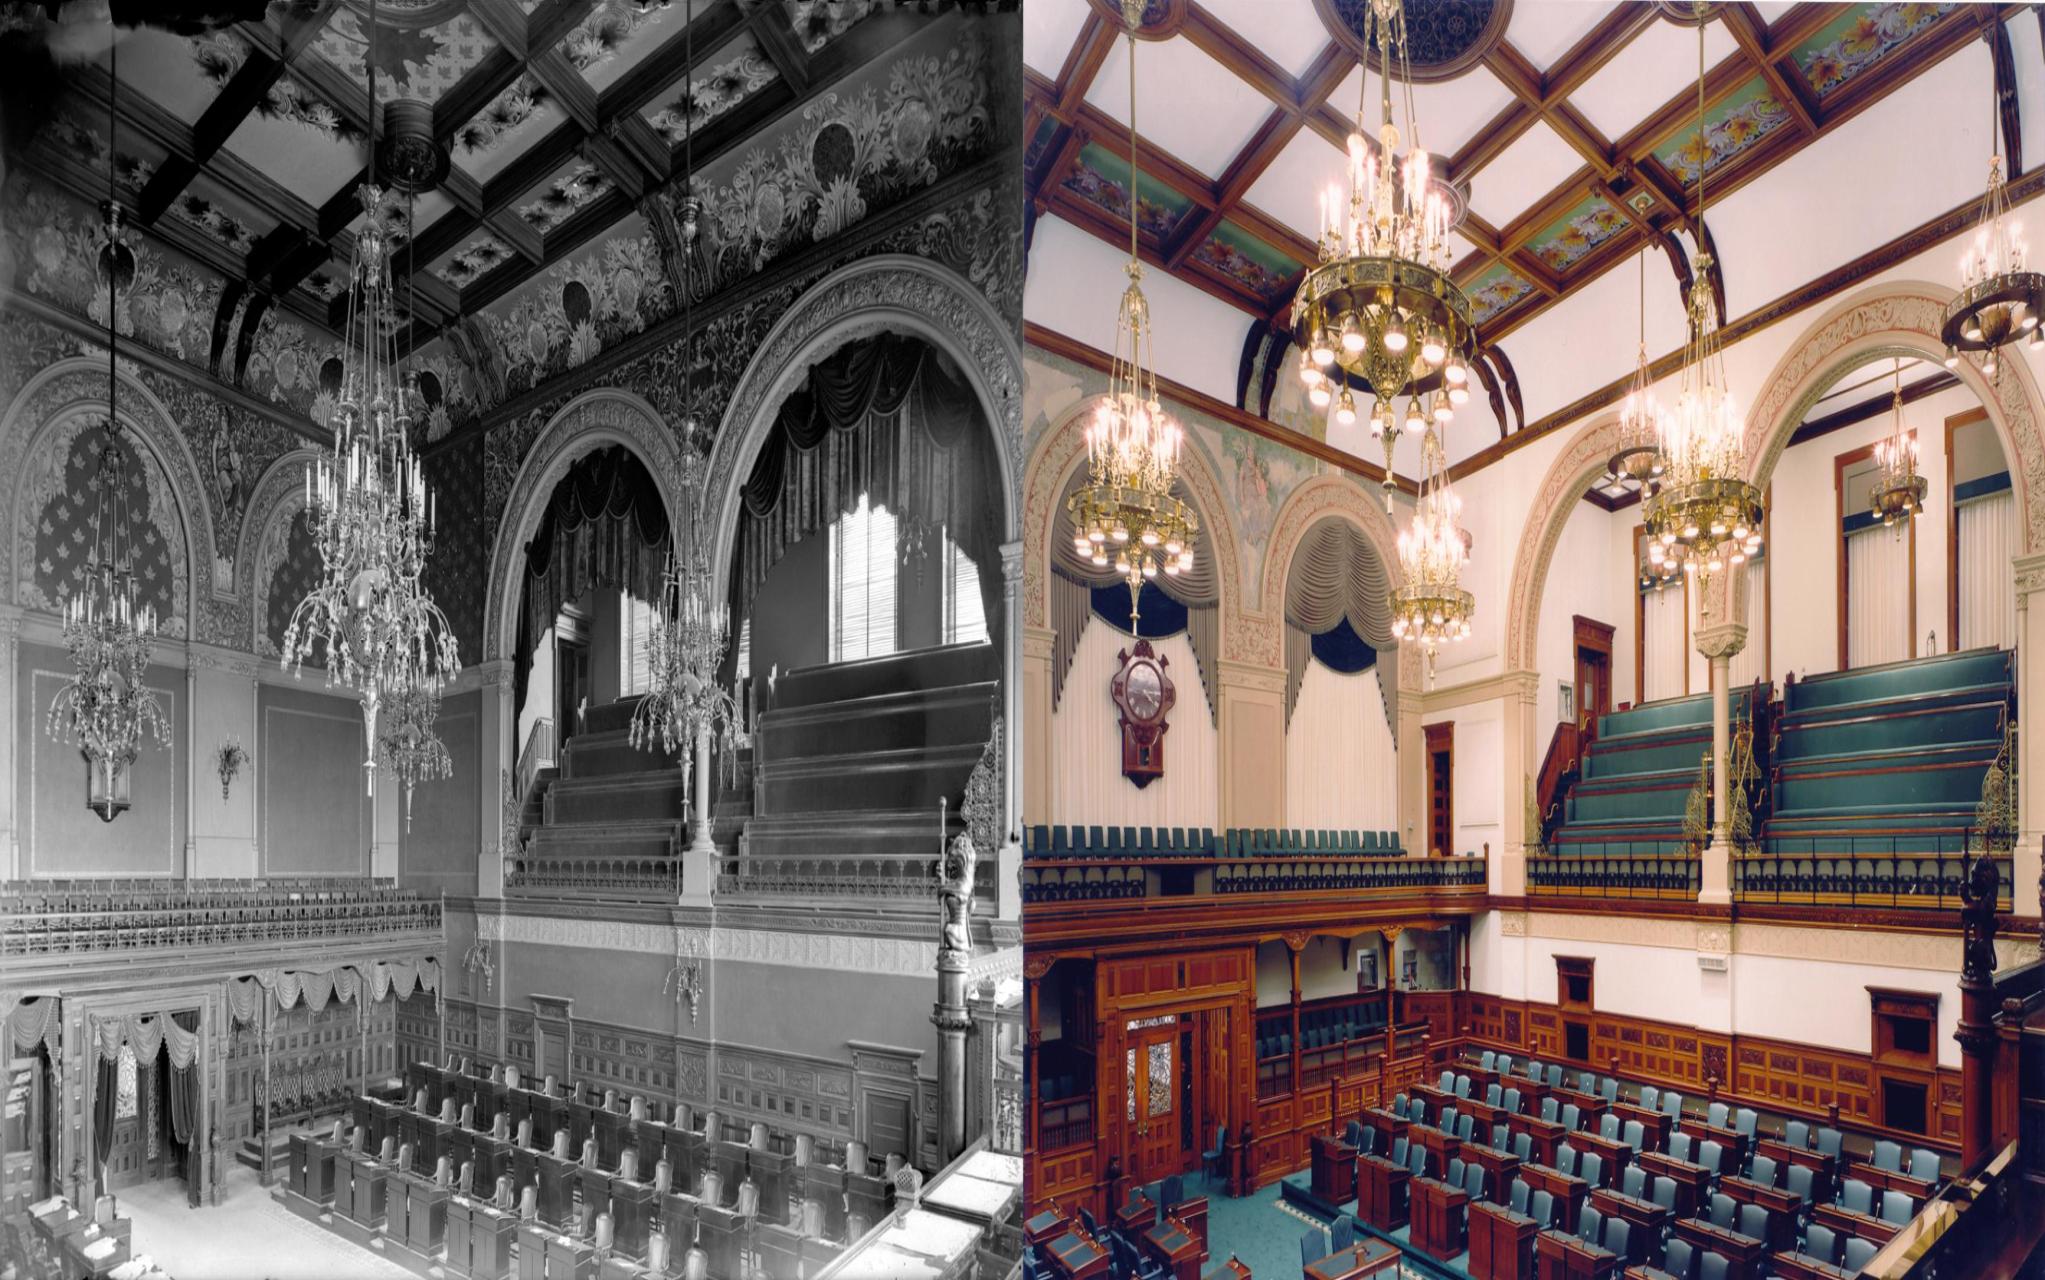 The Legislative Chamber - the view on the left is from 1893, the view on the right is from present day